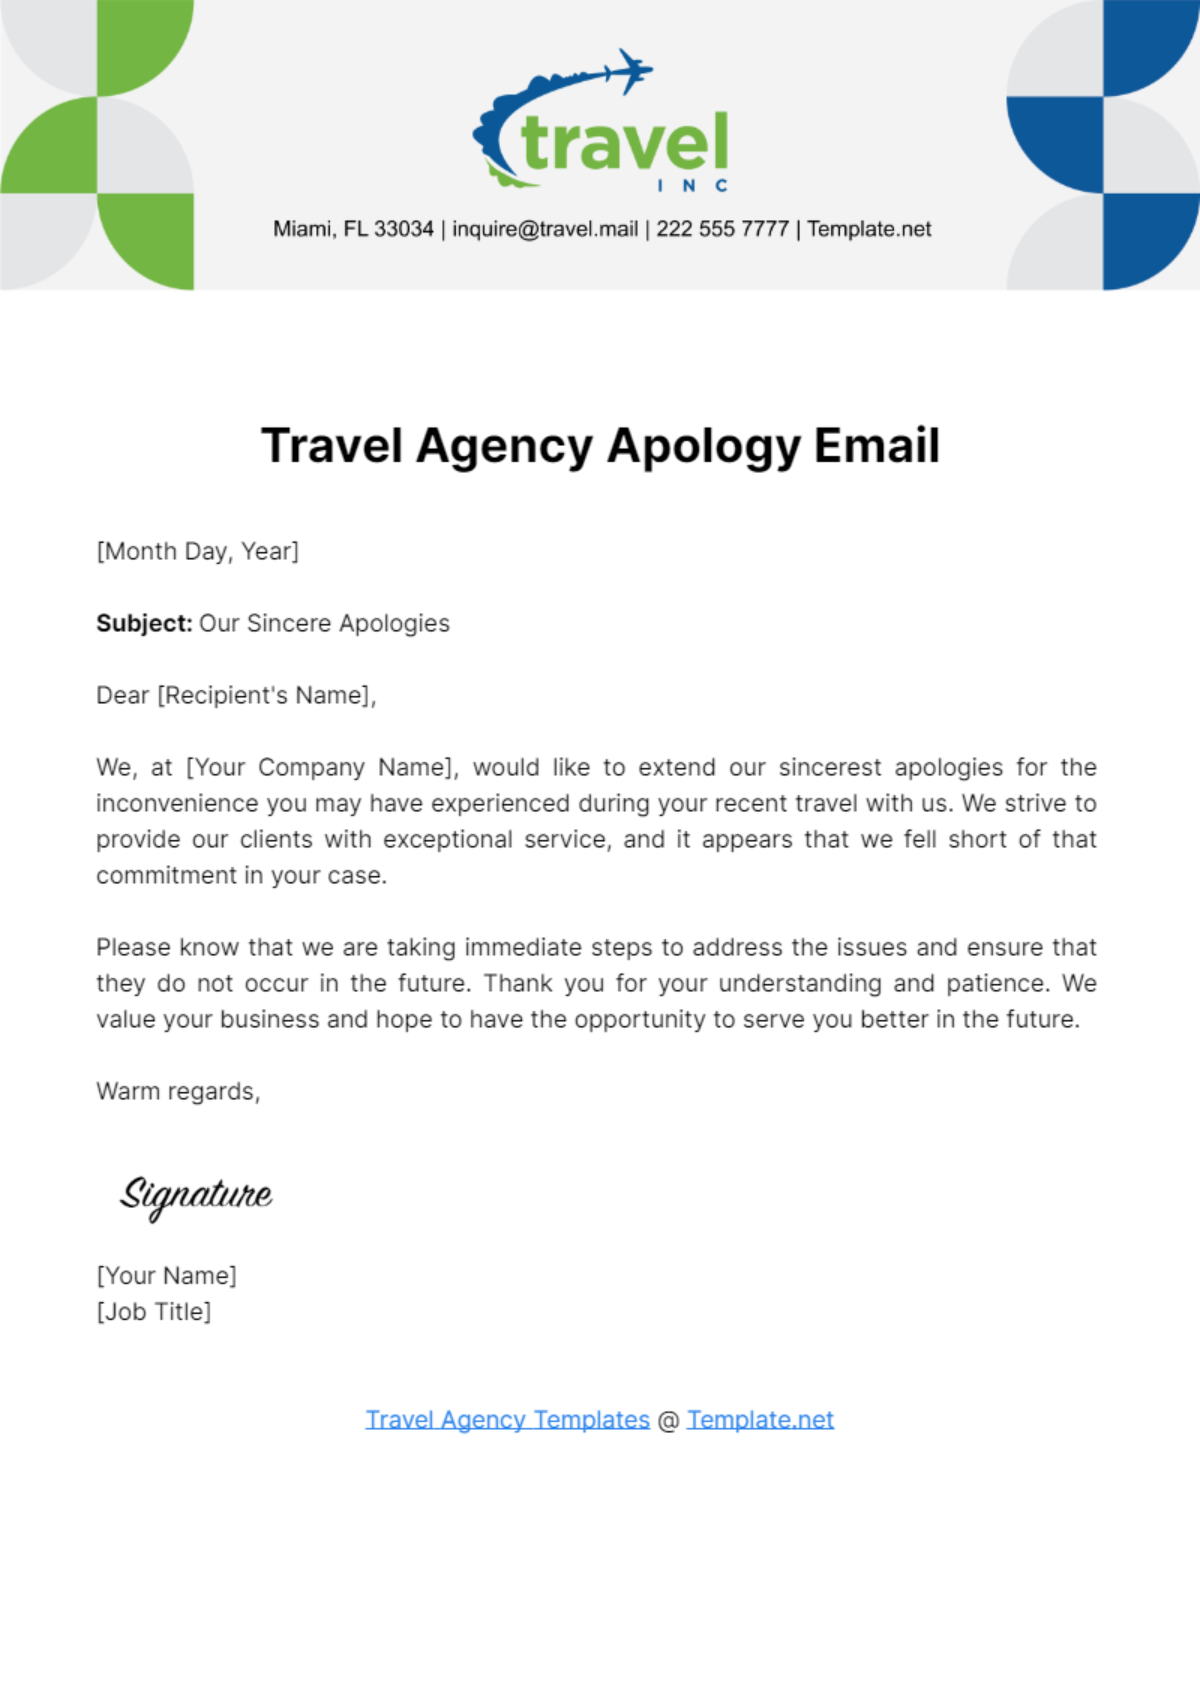 Travel Agency Apology Email Template